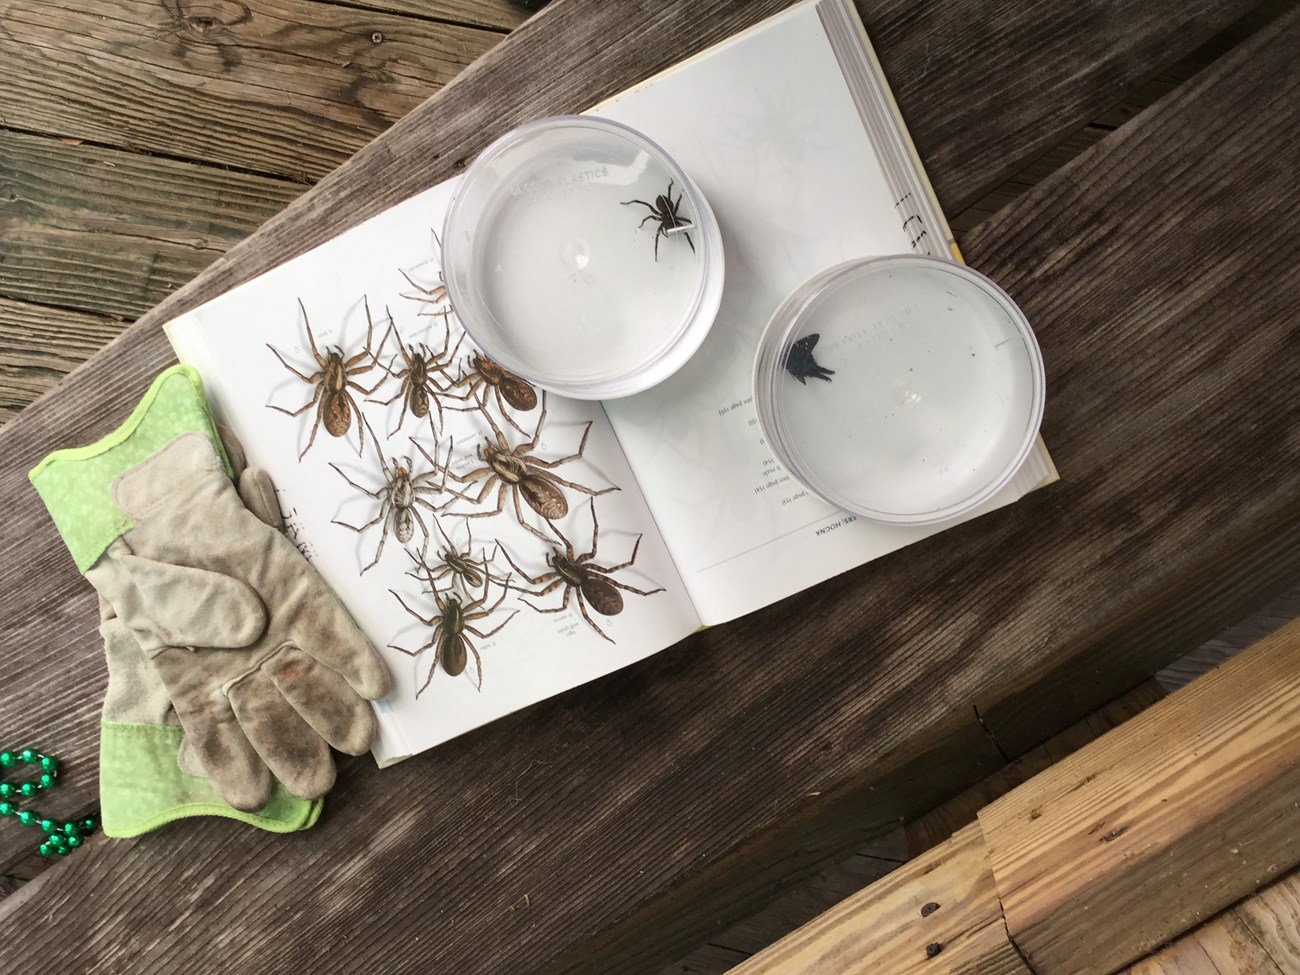 species identification book on table with gloves and two dishes holding insects.